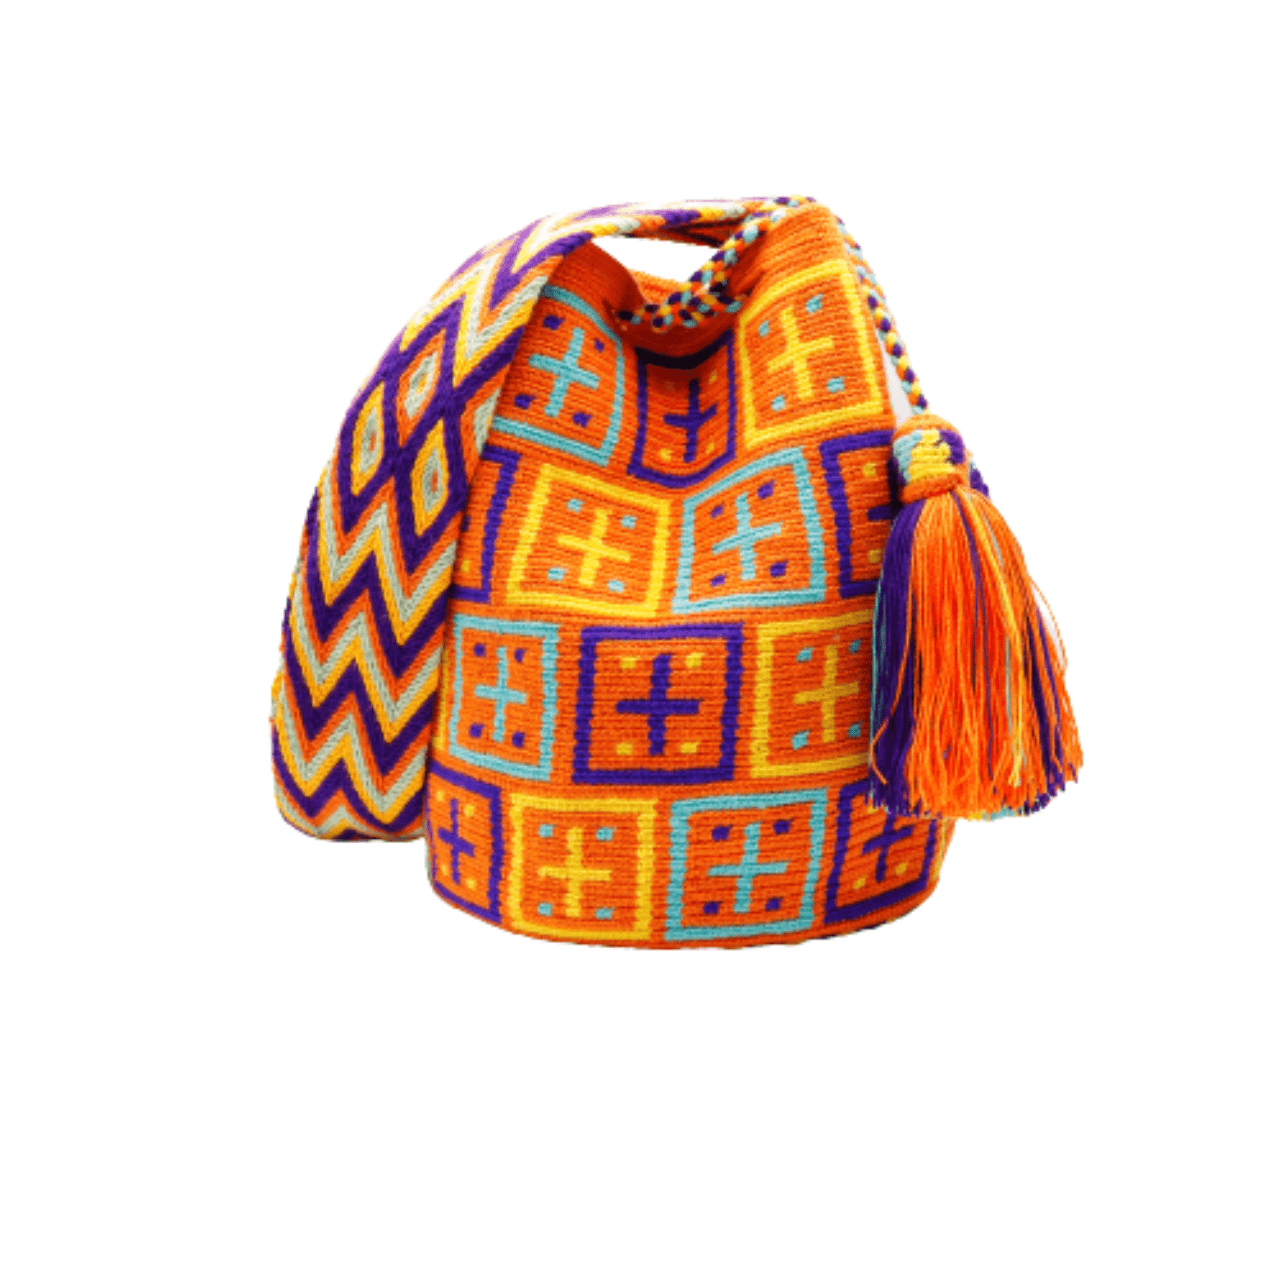 This gorgeous and unique Wayuu bag features a happy and vibrant palette of warm colors. Its eye-catching beauty will draw attention wherever you go. Shop now and make a statement with this stunning Wayuu bag.